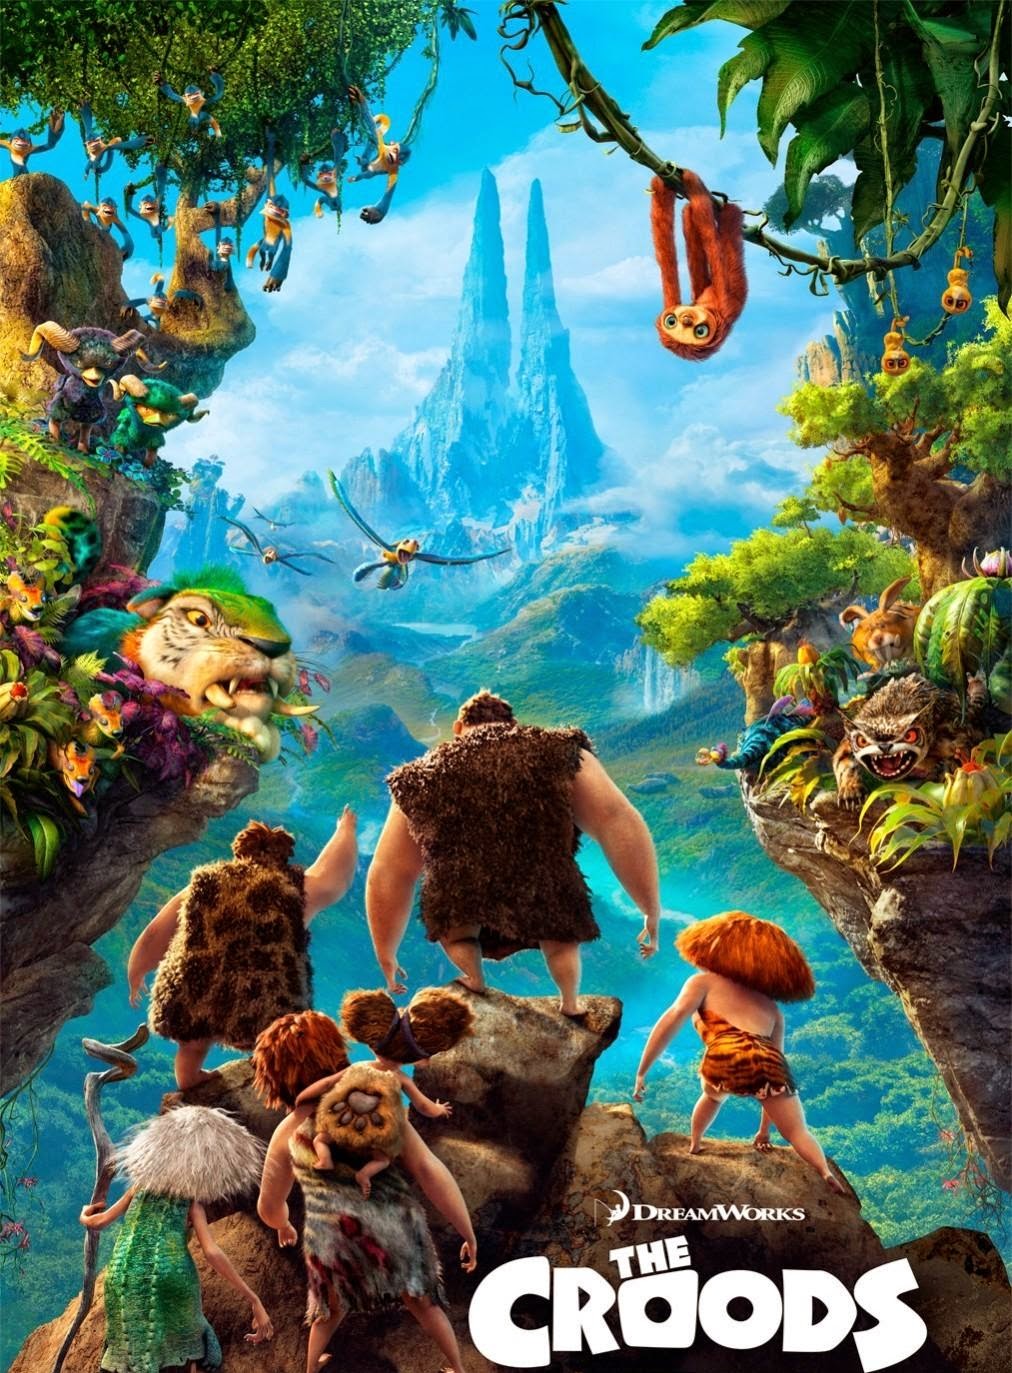 Watch The Croods (2013) Online For Free Full Movie English Stream